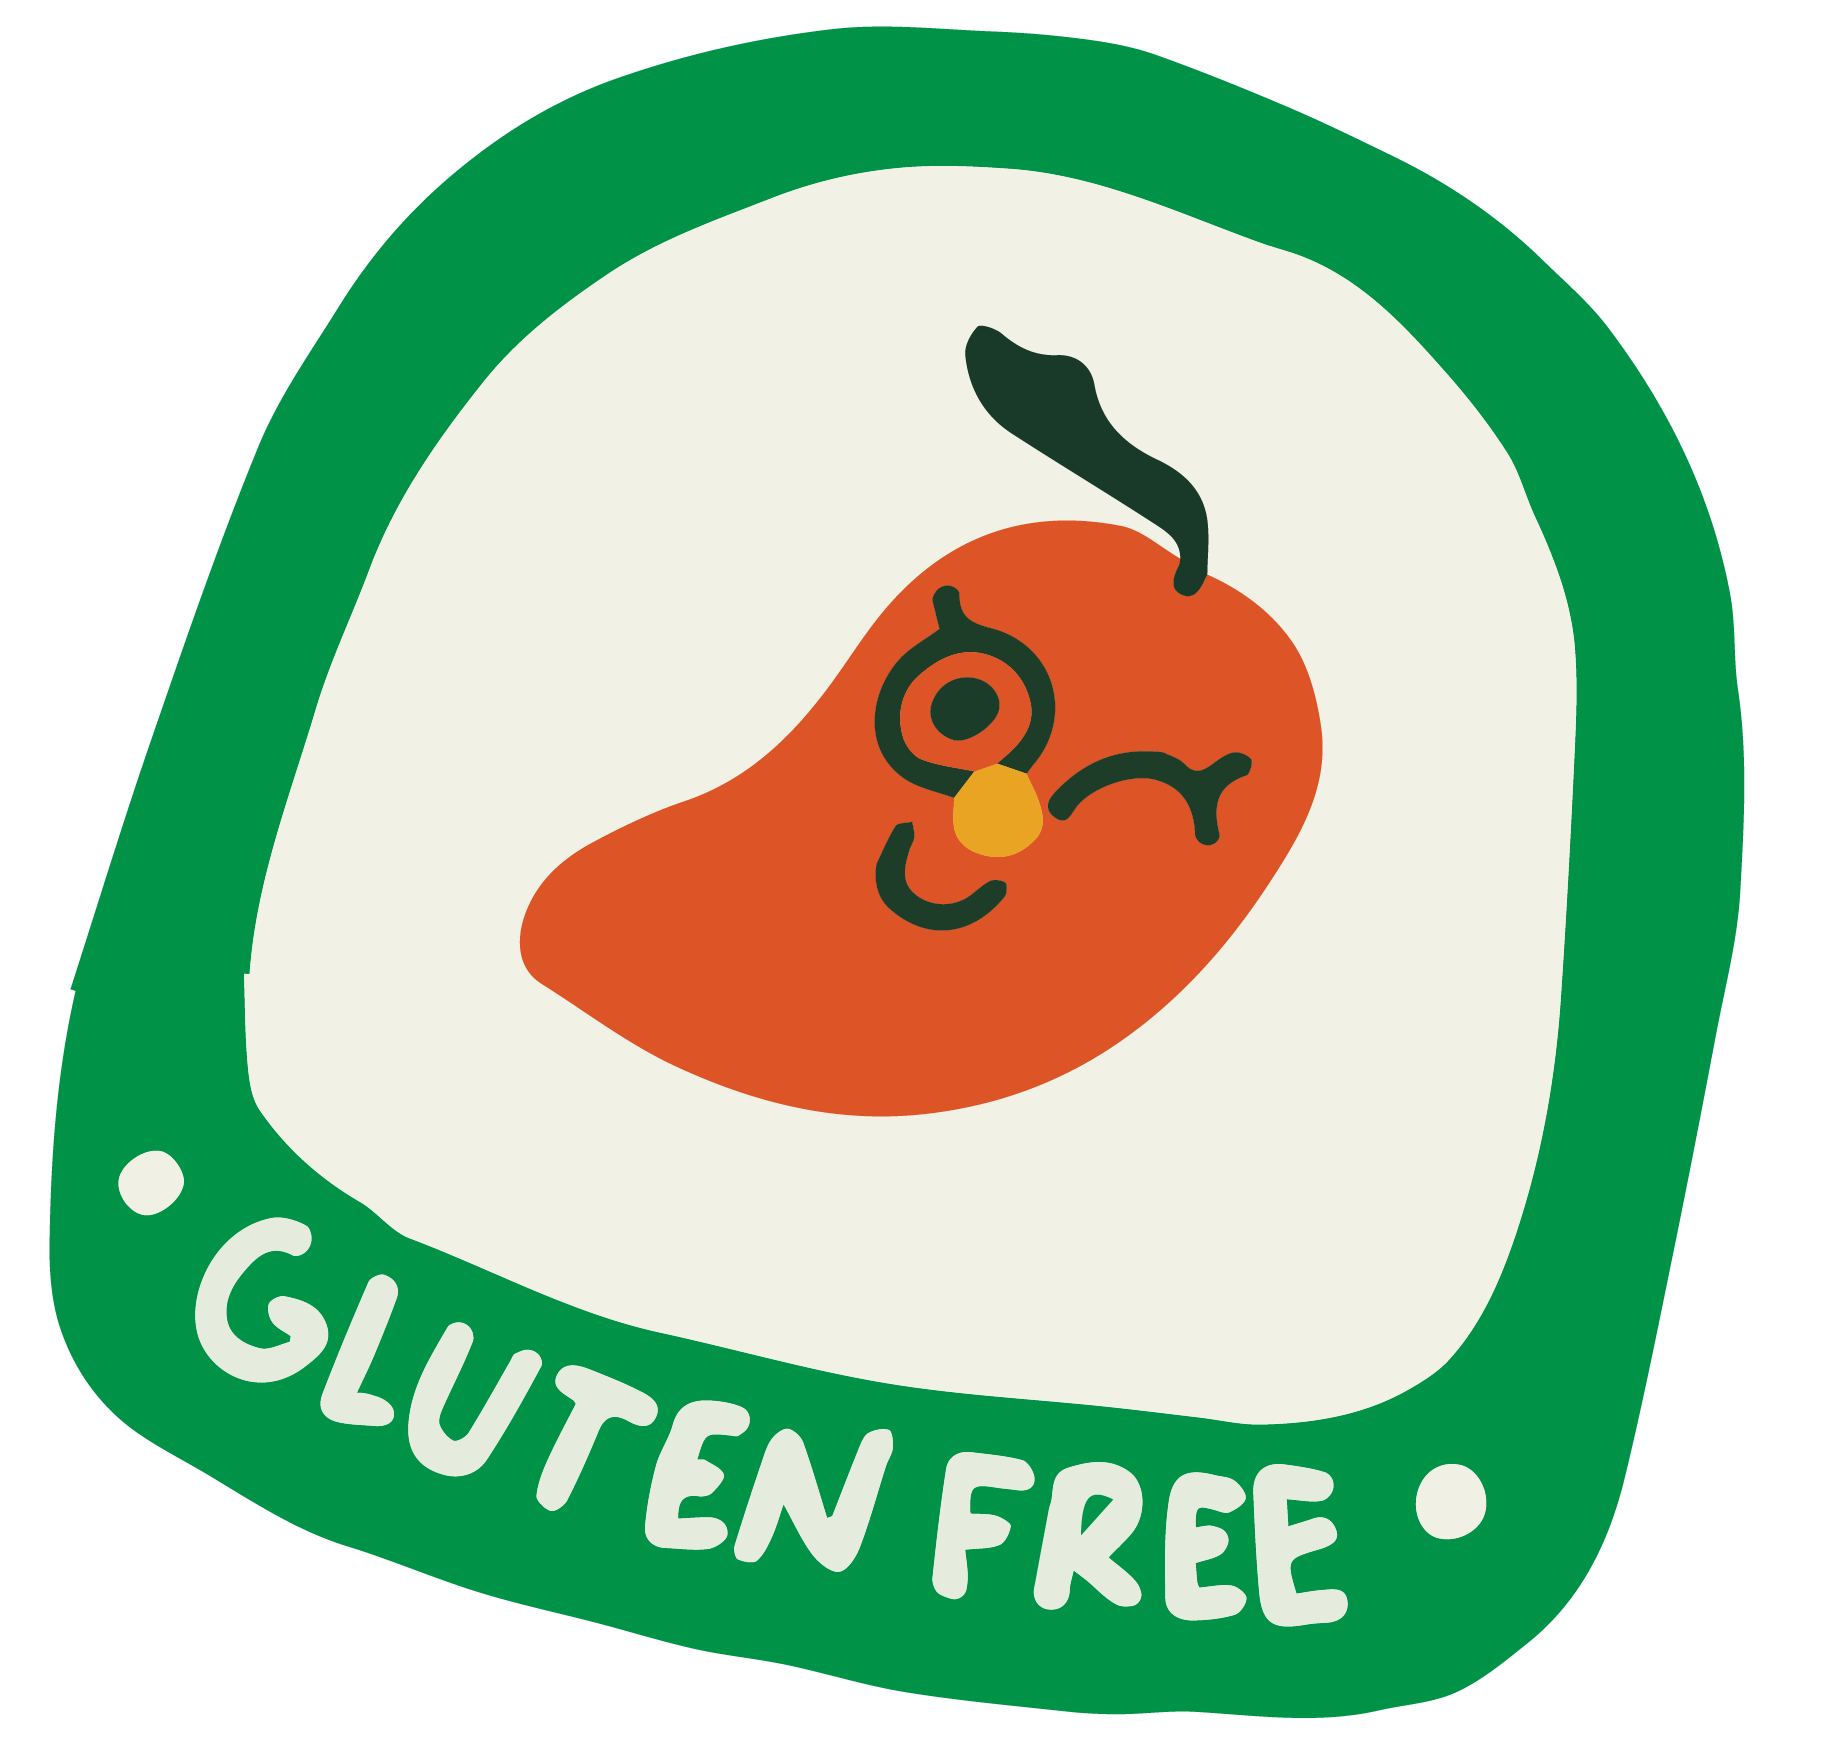 Gluten free sticker. Outlined in green with cute mango fruit character in center, winking at camera.